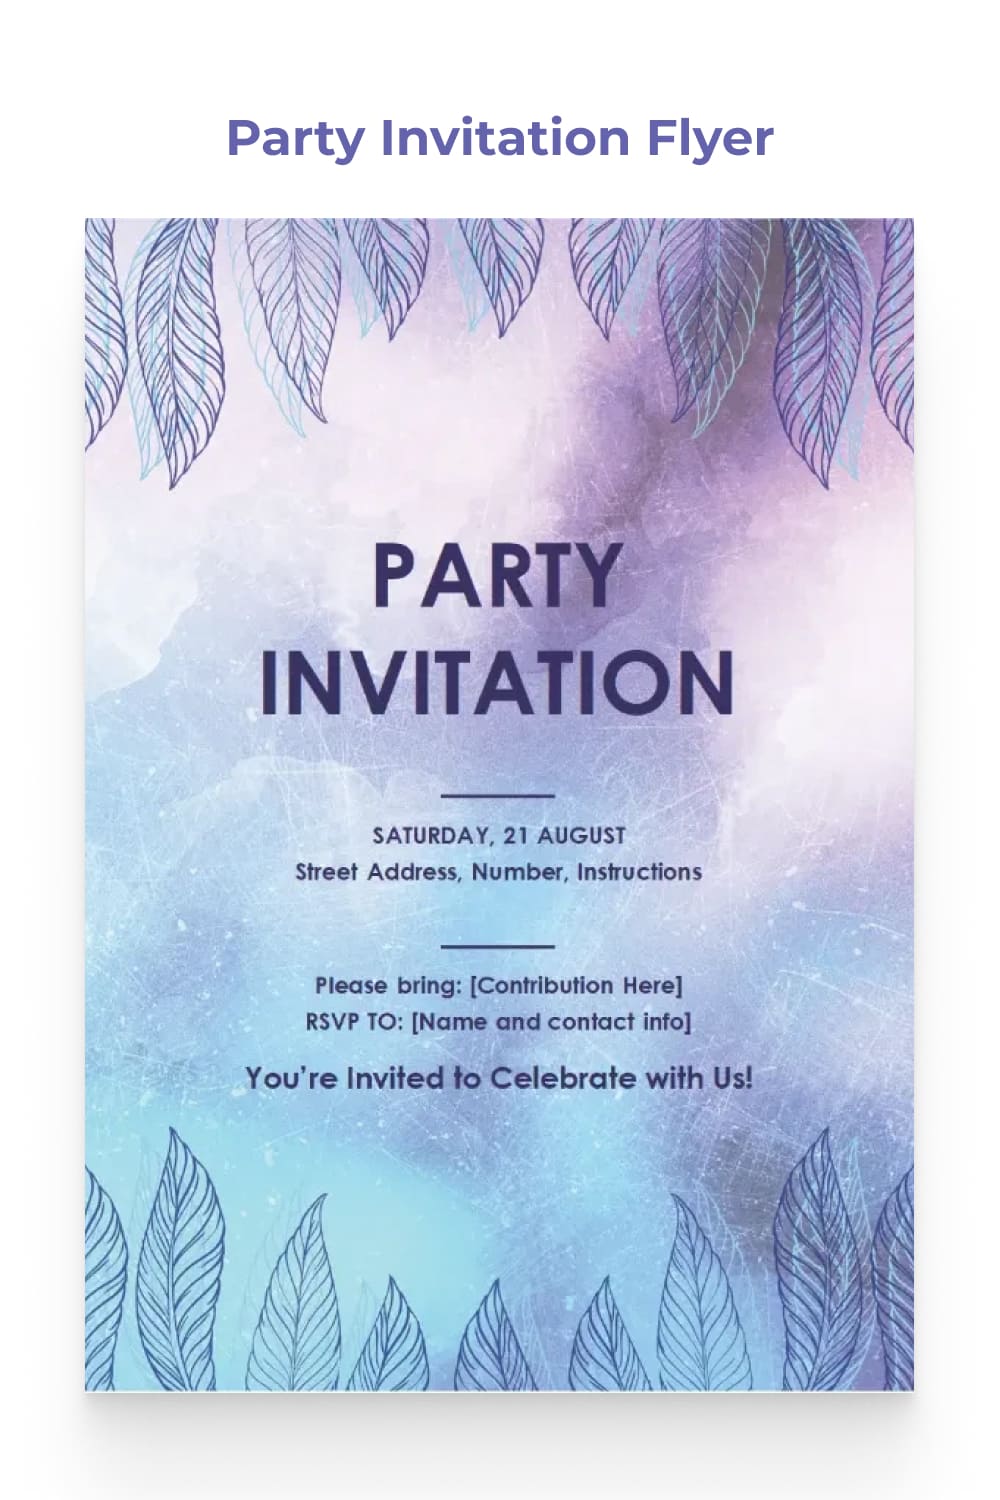 Party invitation with gradient background.